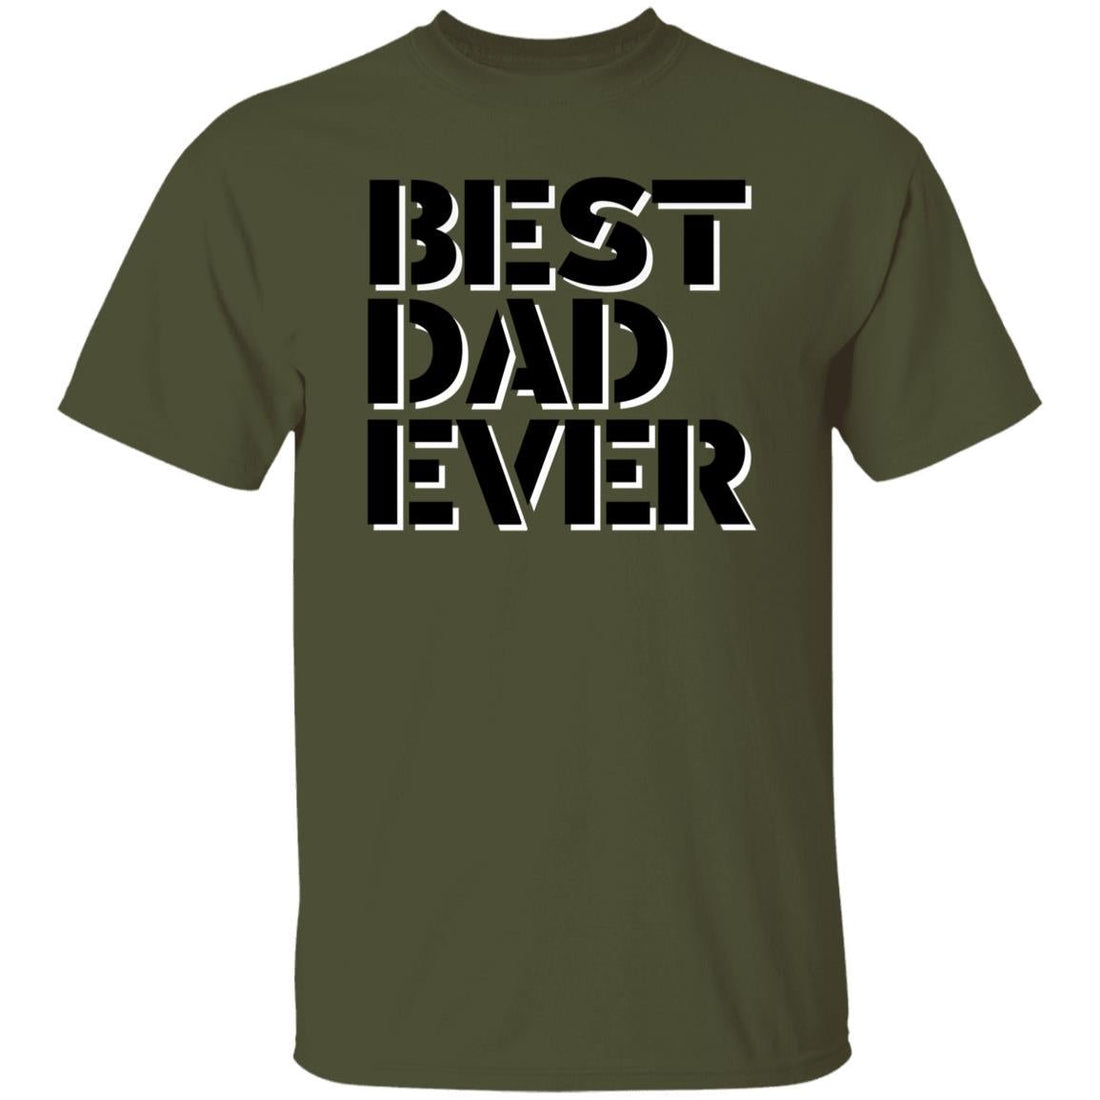 Best Dad Ever T-Shirt - T-Shirts - Positively Sassy - Best Dad Ever T-Shirt